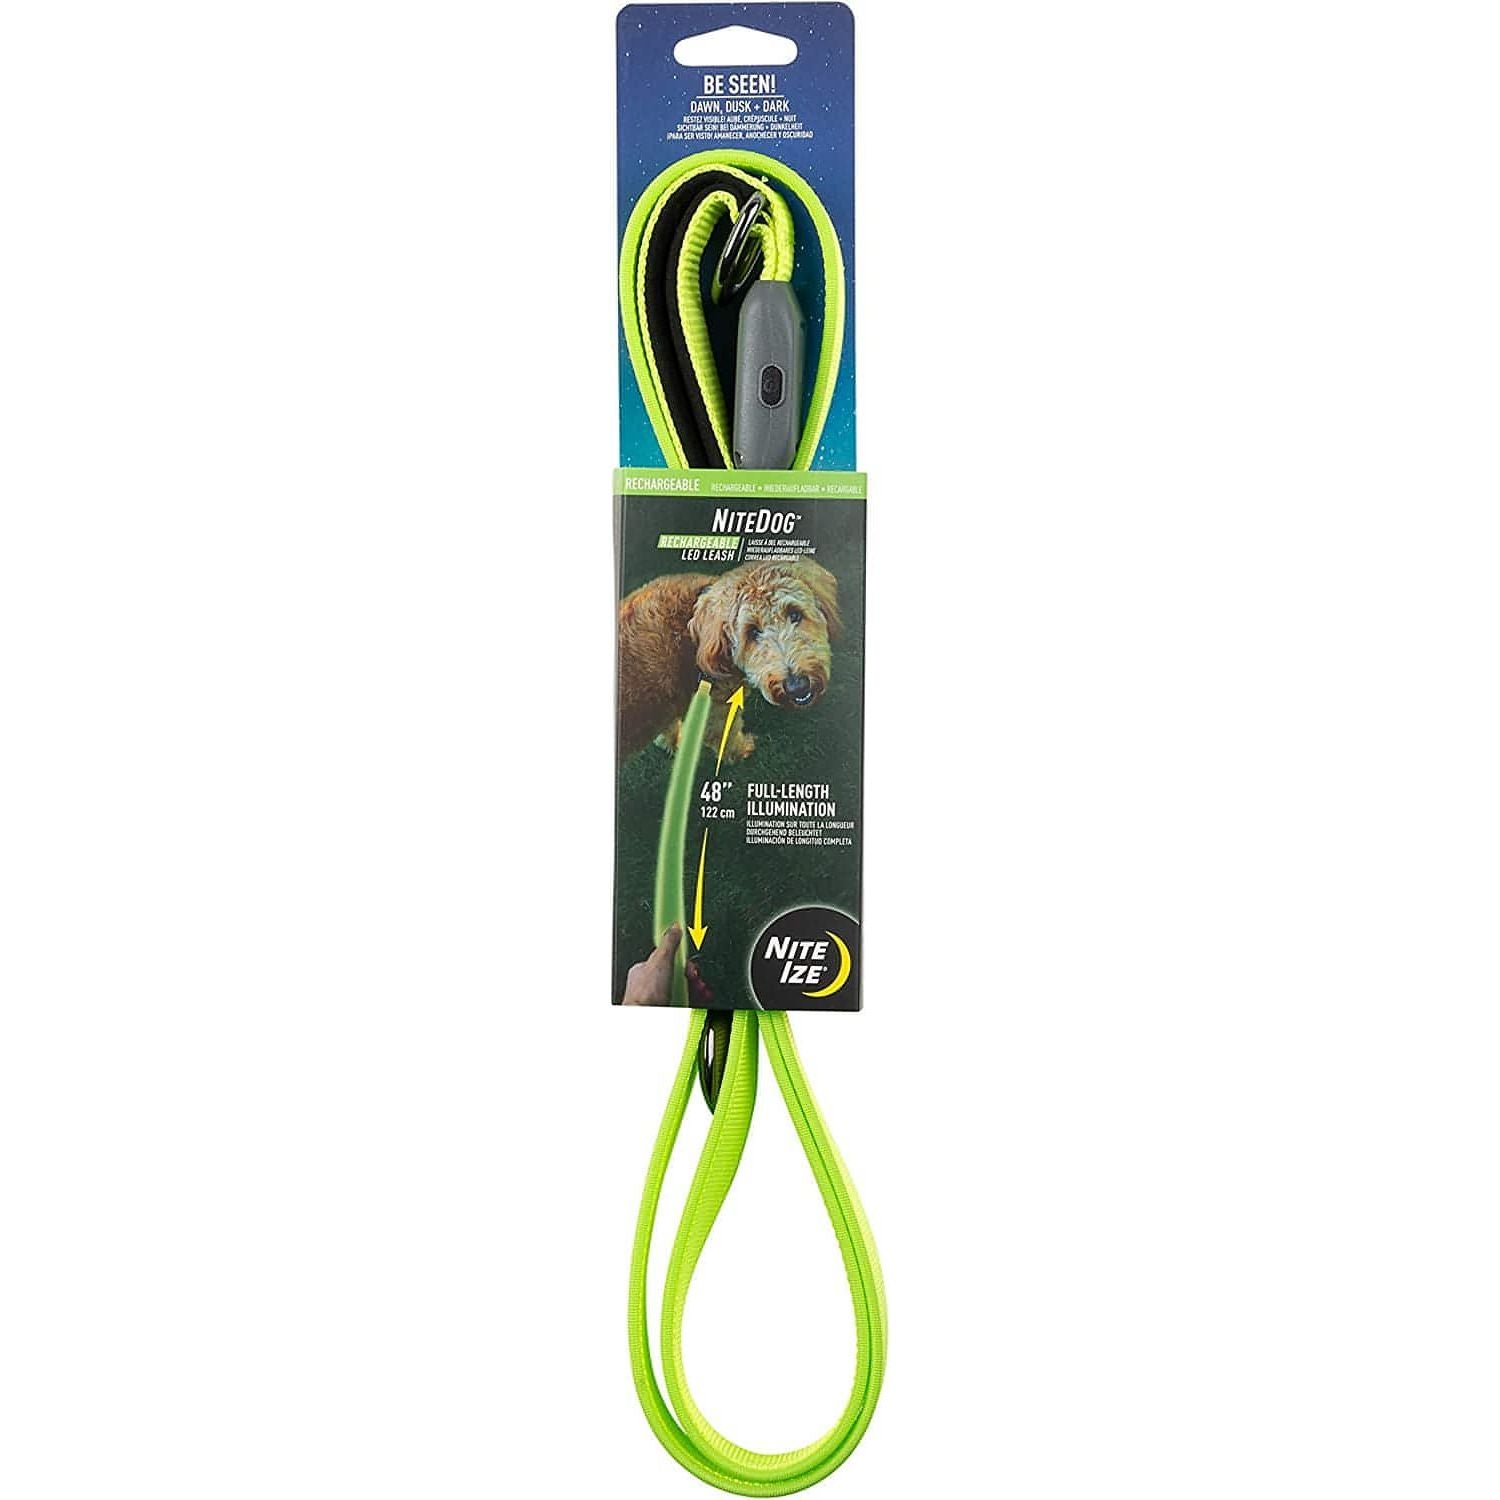 Nite Ize NiteDog Rechargeable LED Leash, USB Rechargeable 5 Foot Light Up Dog Leash w/Padded Handle, Lime - Brandat Outlet